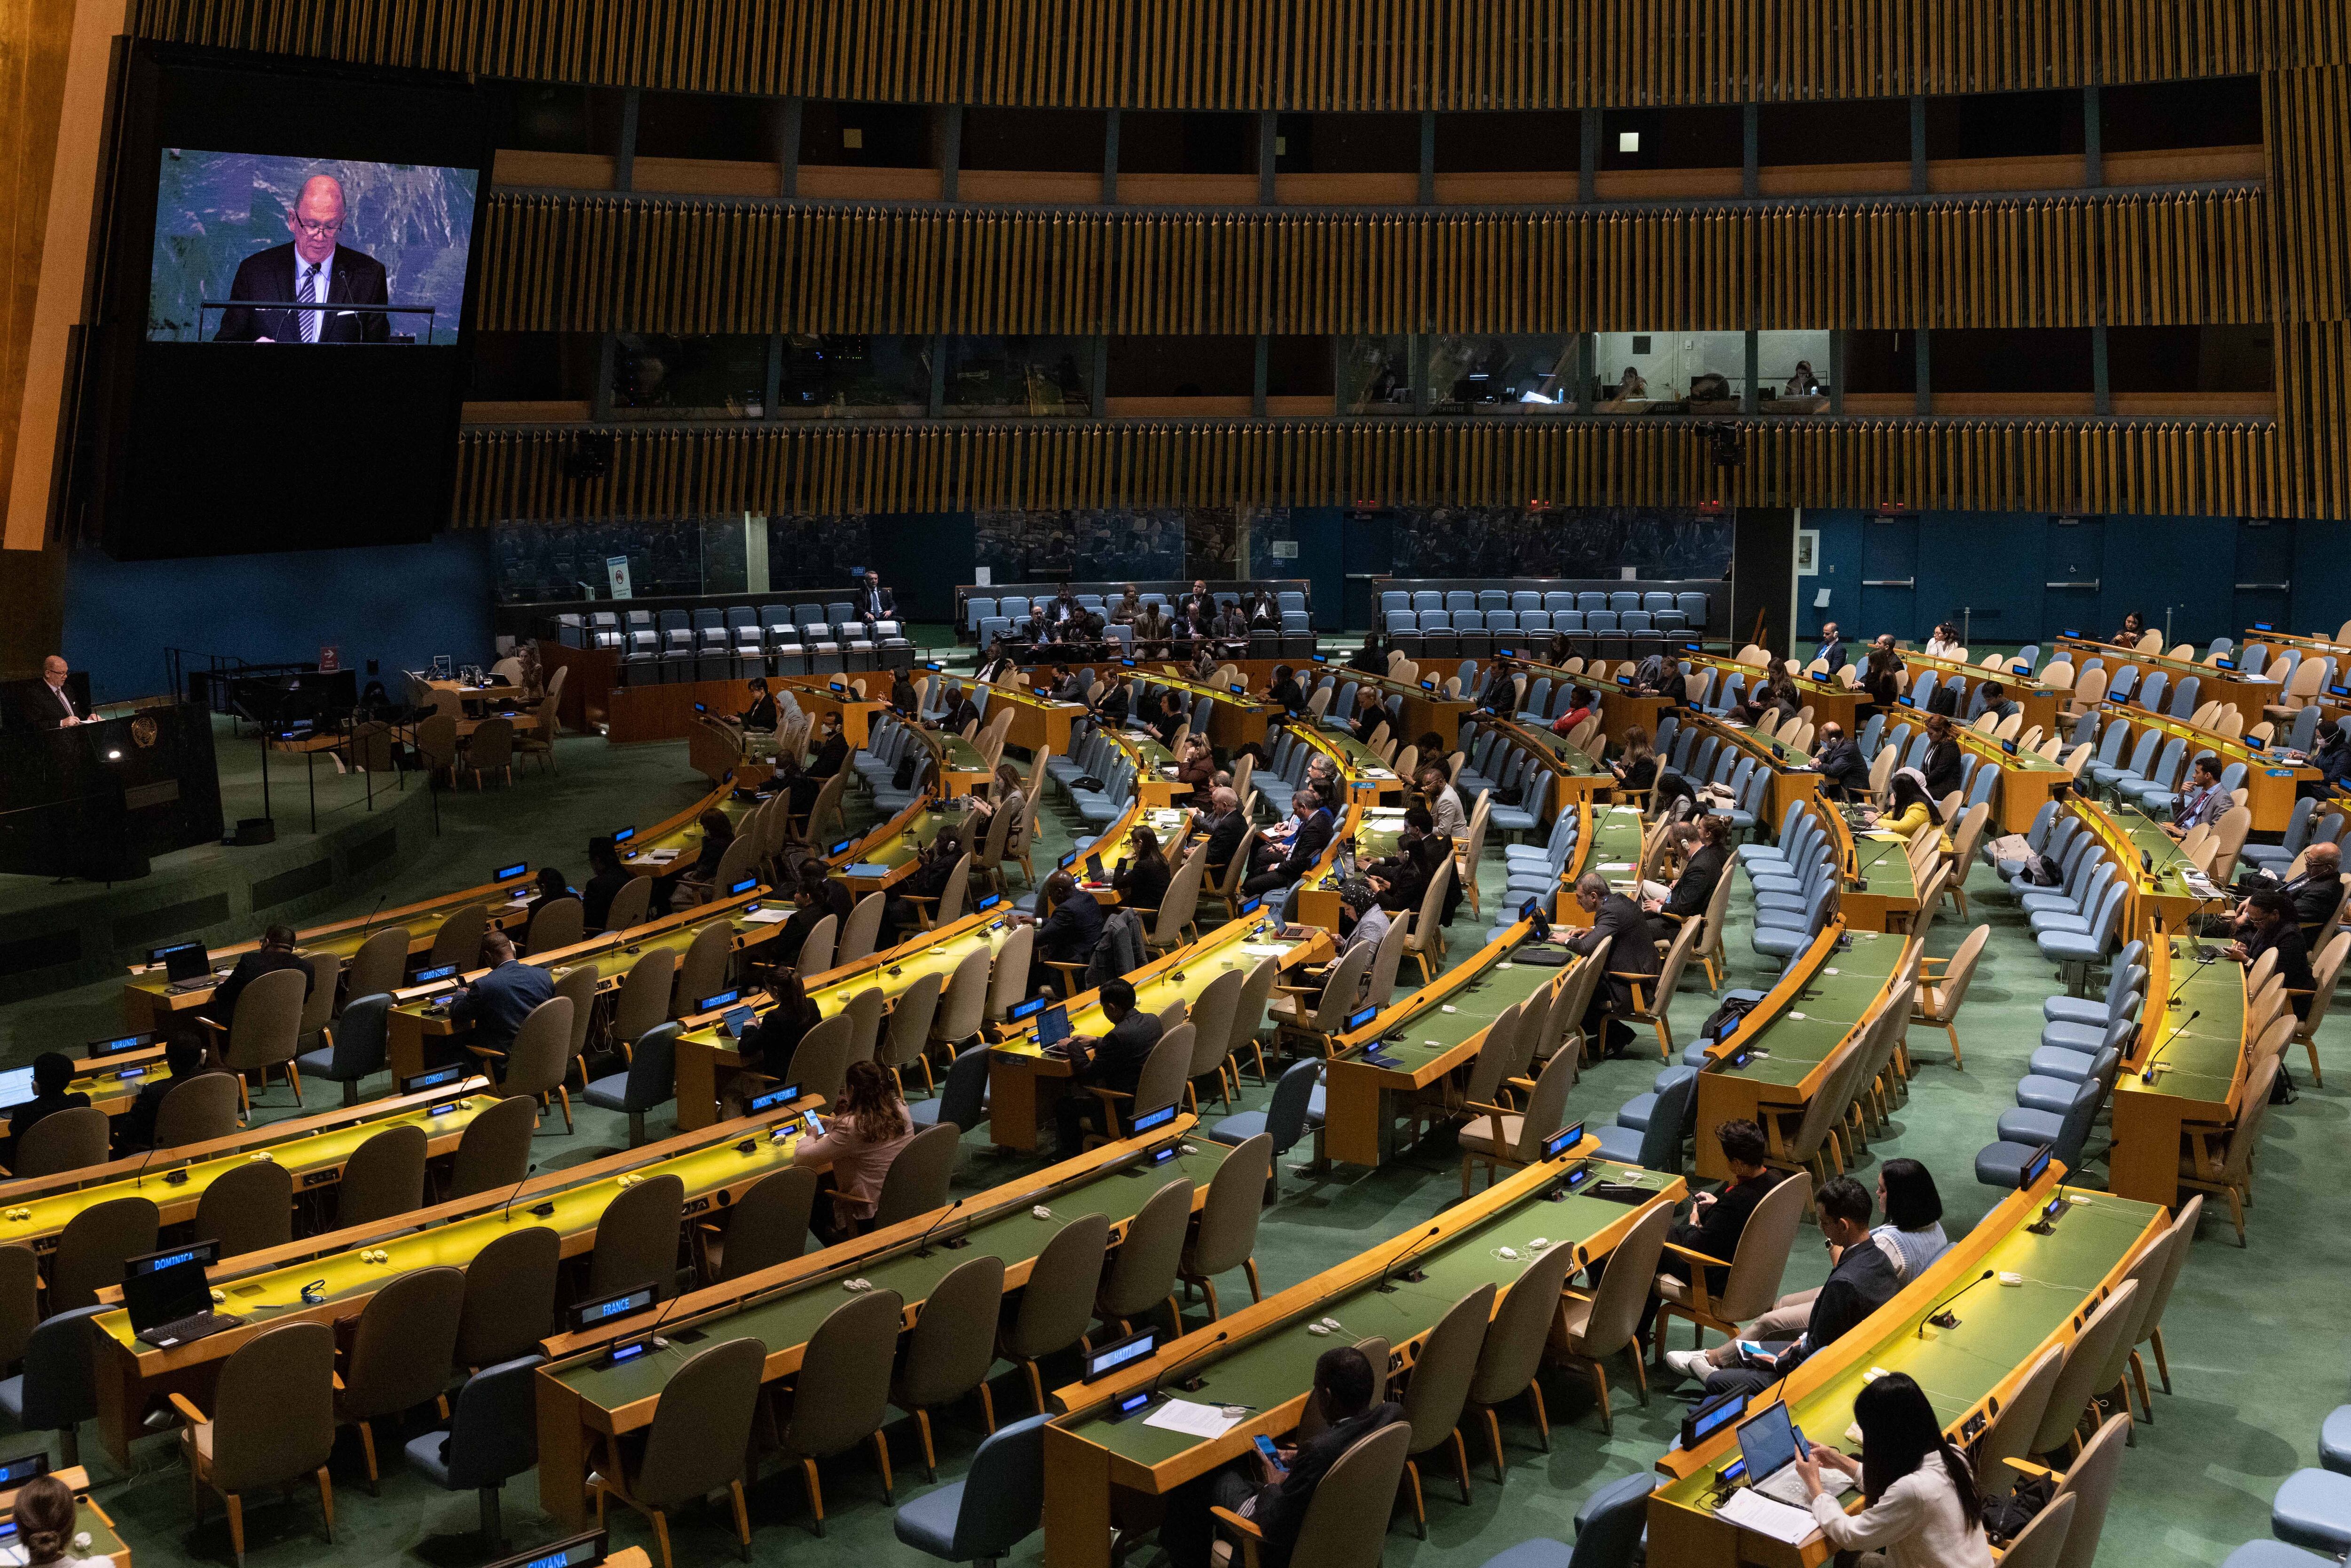 A general view shows a United Nations General Assembly meeting regarding the commercial and financial embargo imposed by the United States against Cuba, at the United Nations headquarters in New York City on November 2, 2022. (Photo by Yuki IWAMURA / AFP)